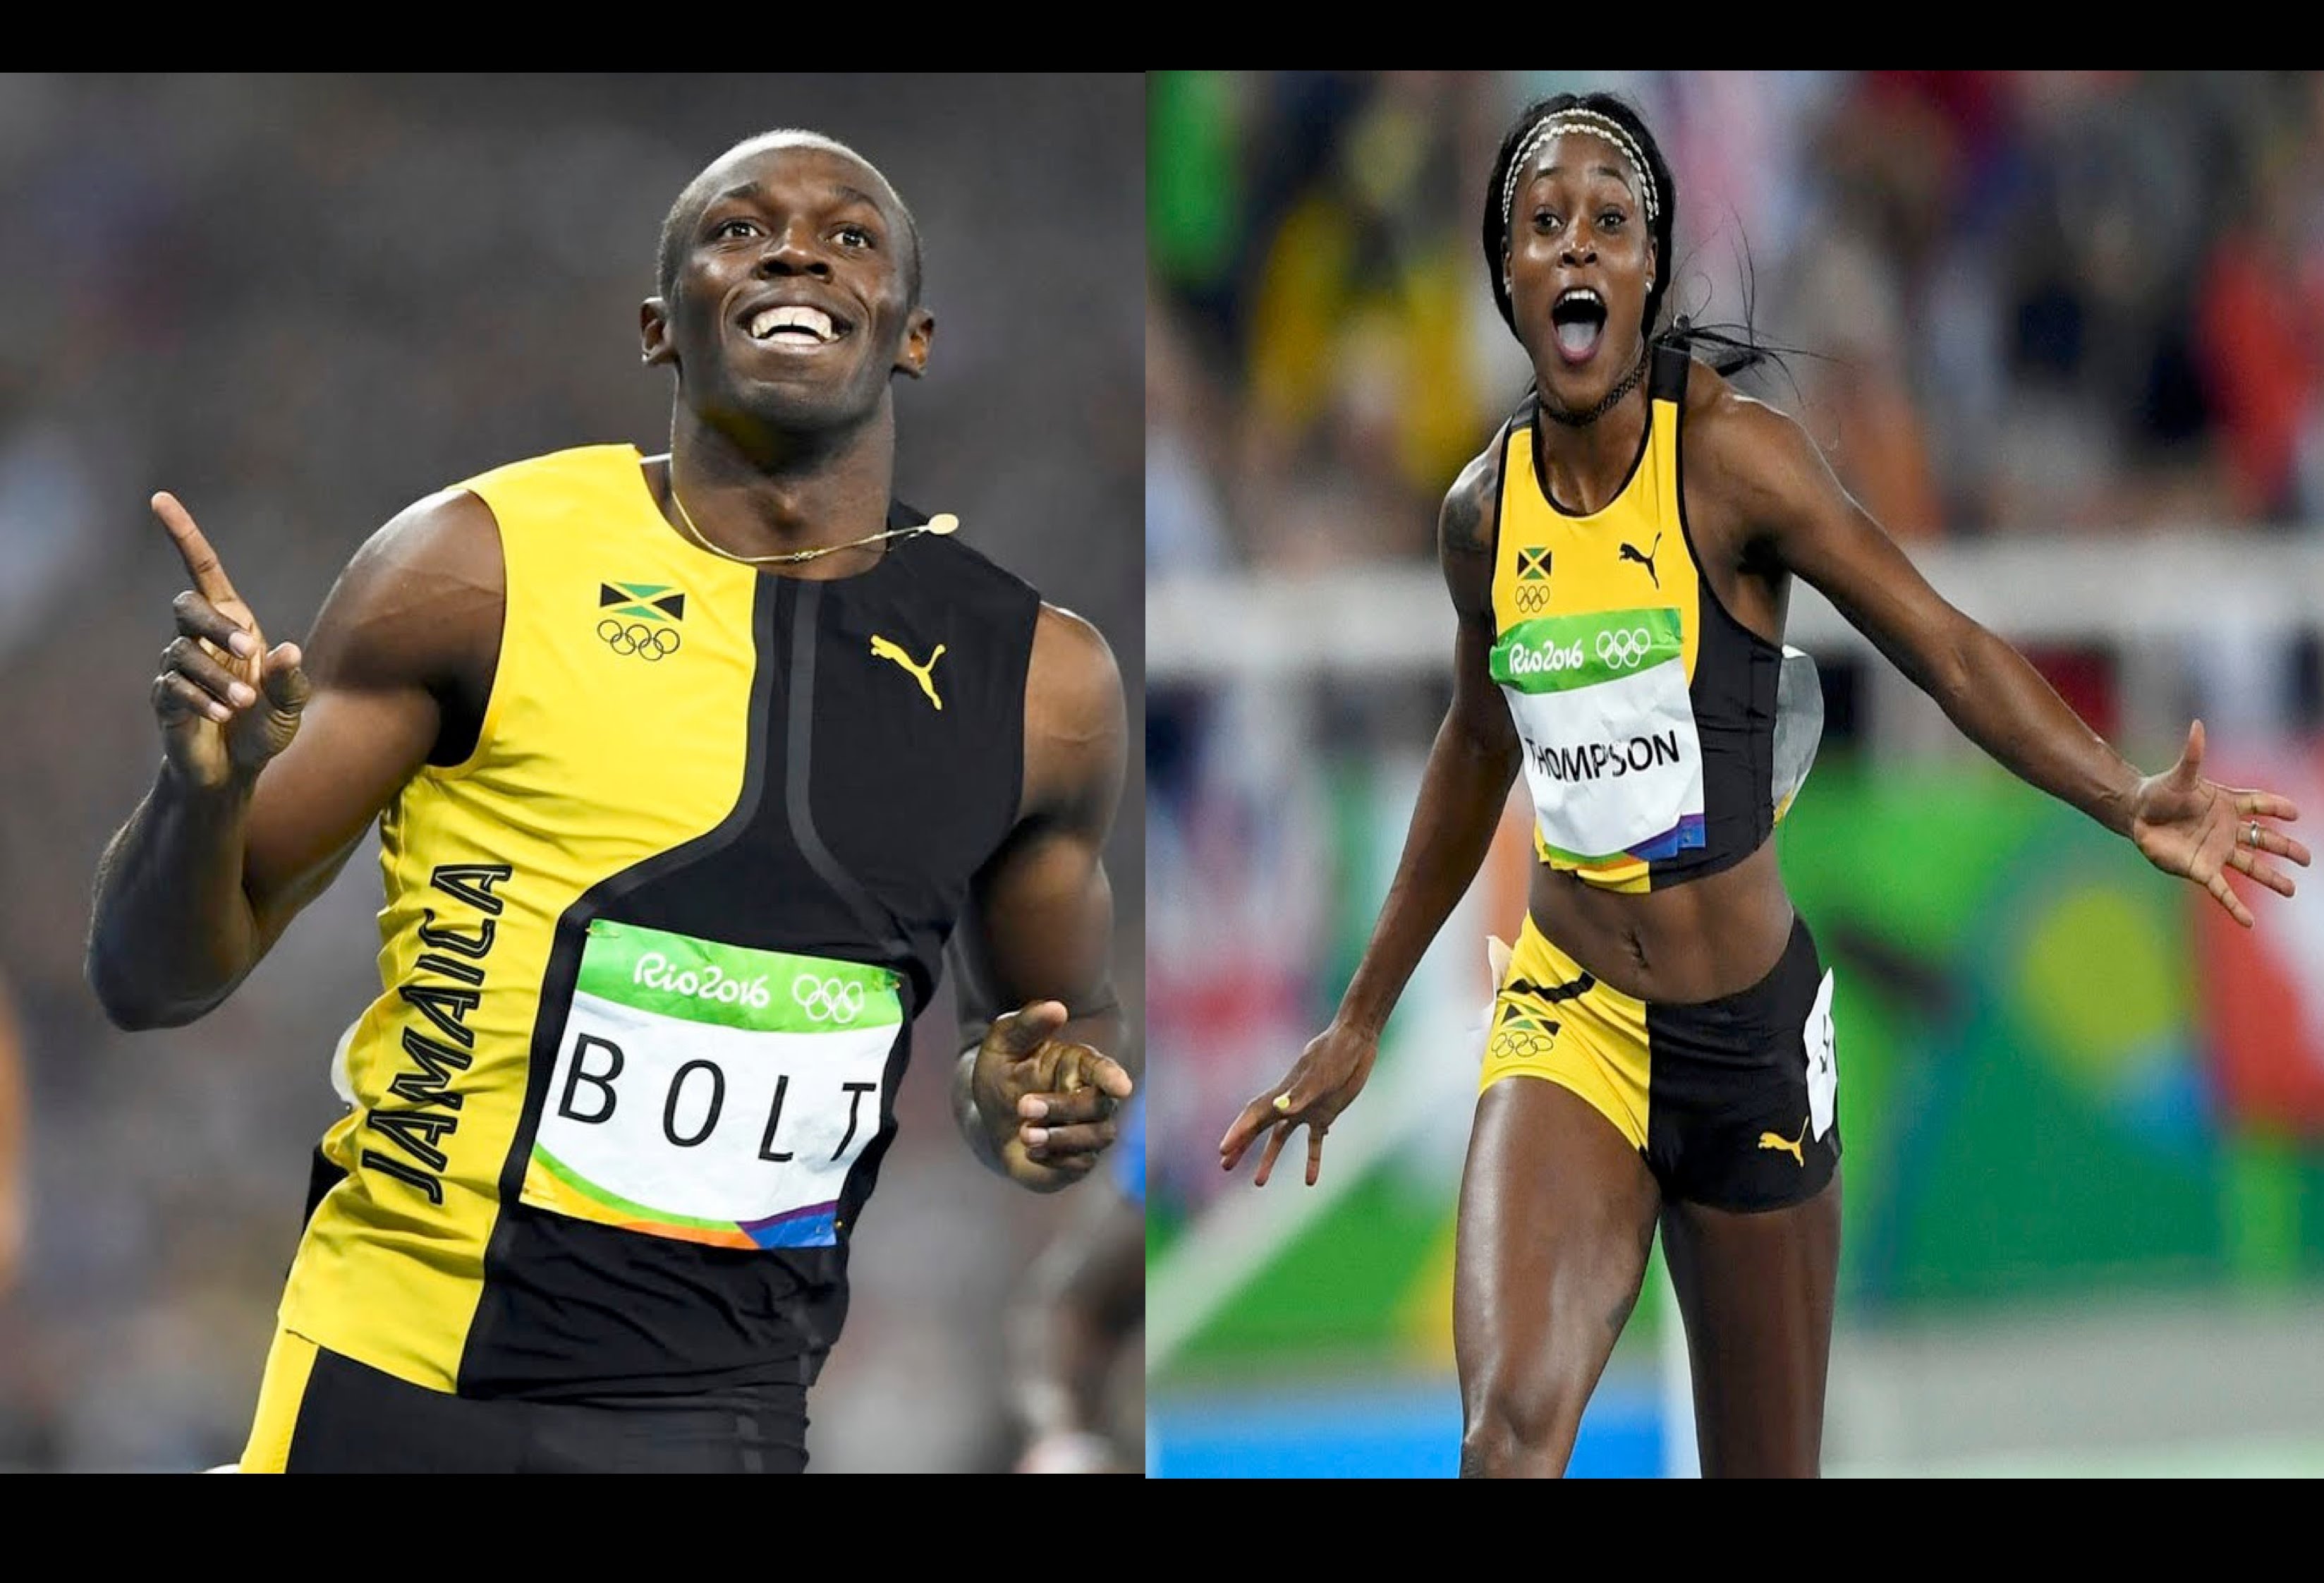 Five T&F athletes nominated for Jamaica top sports awards